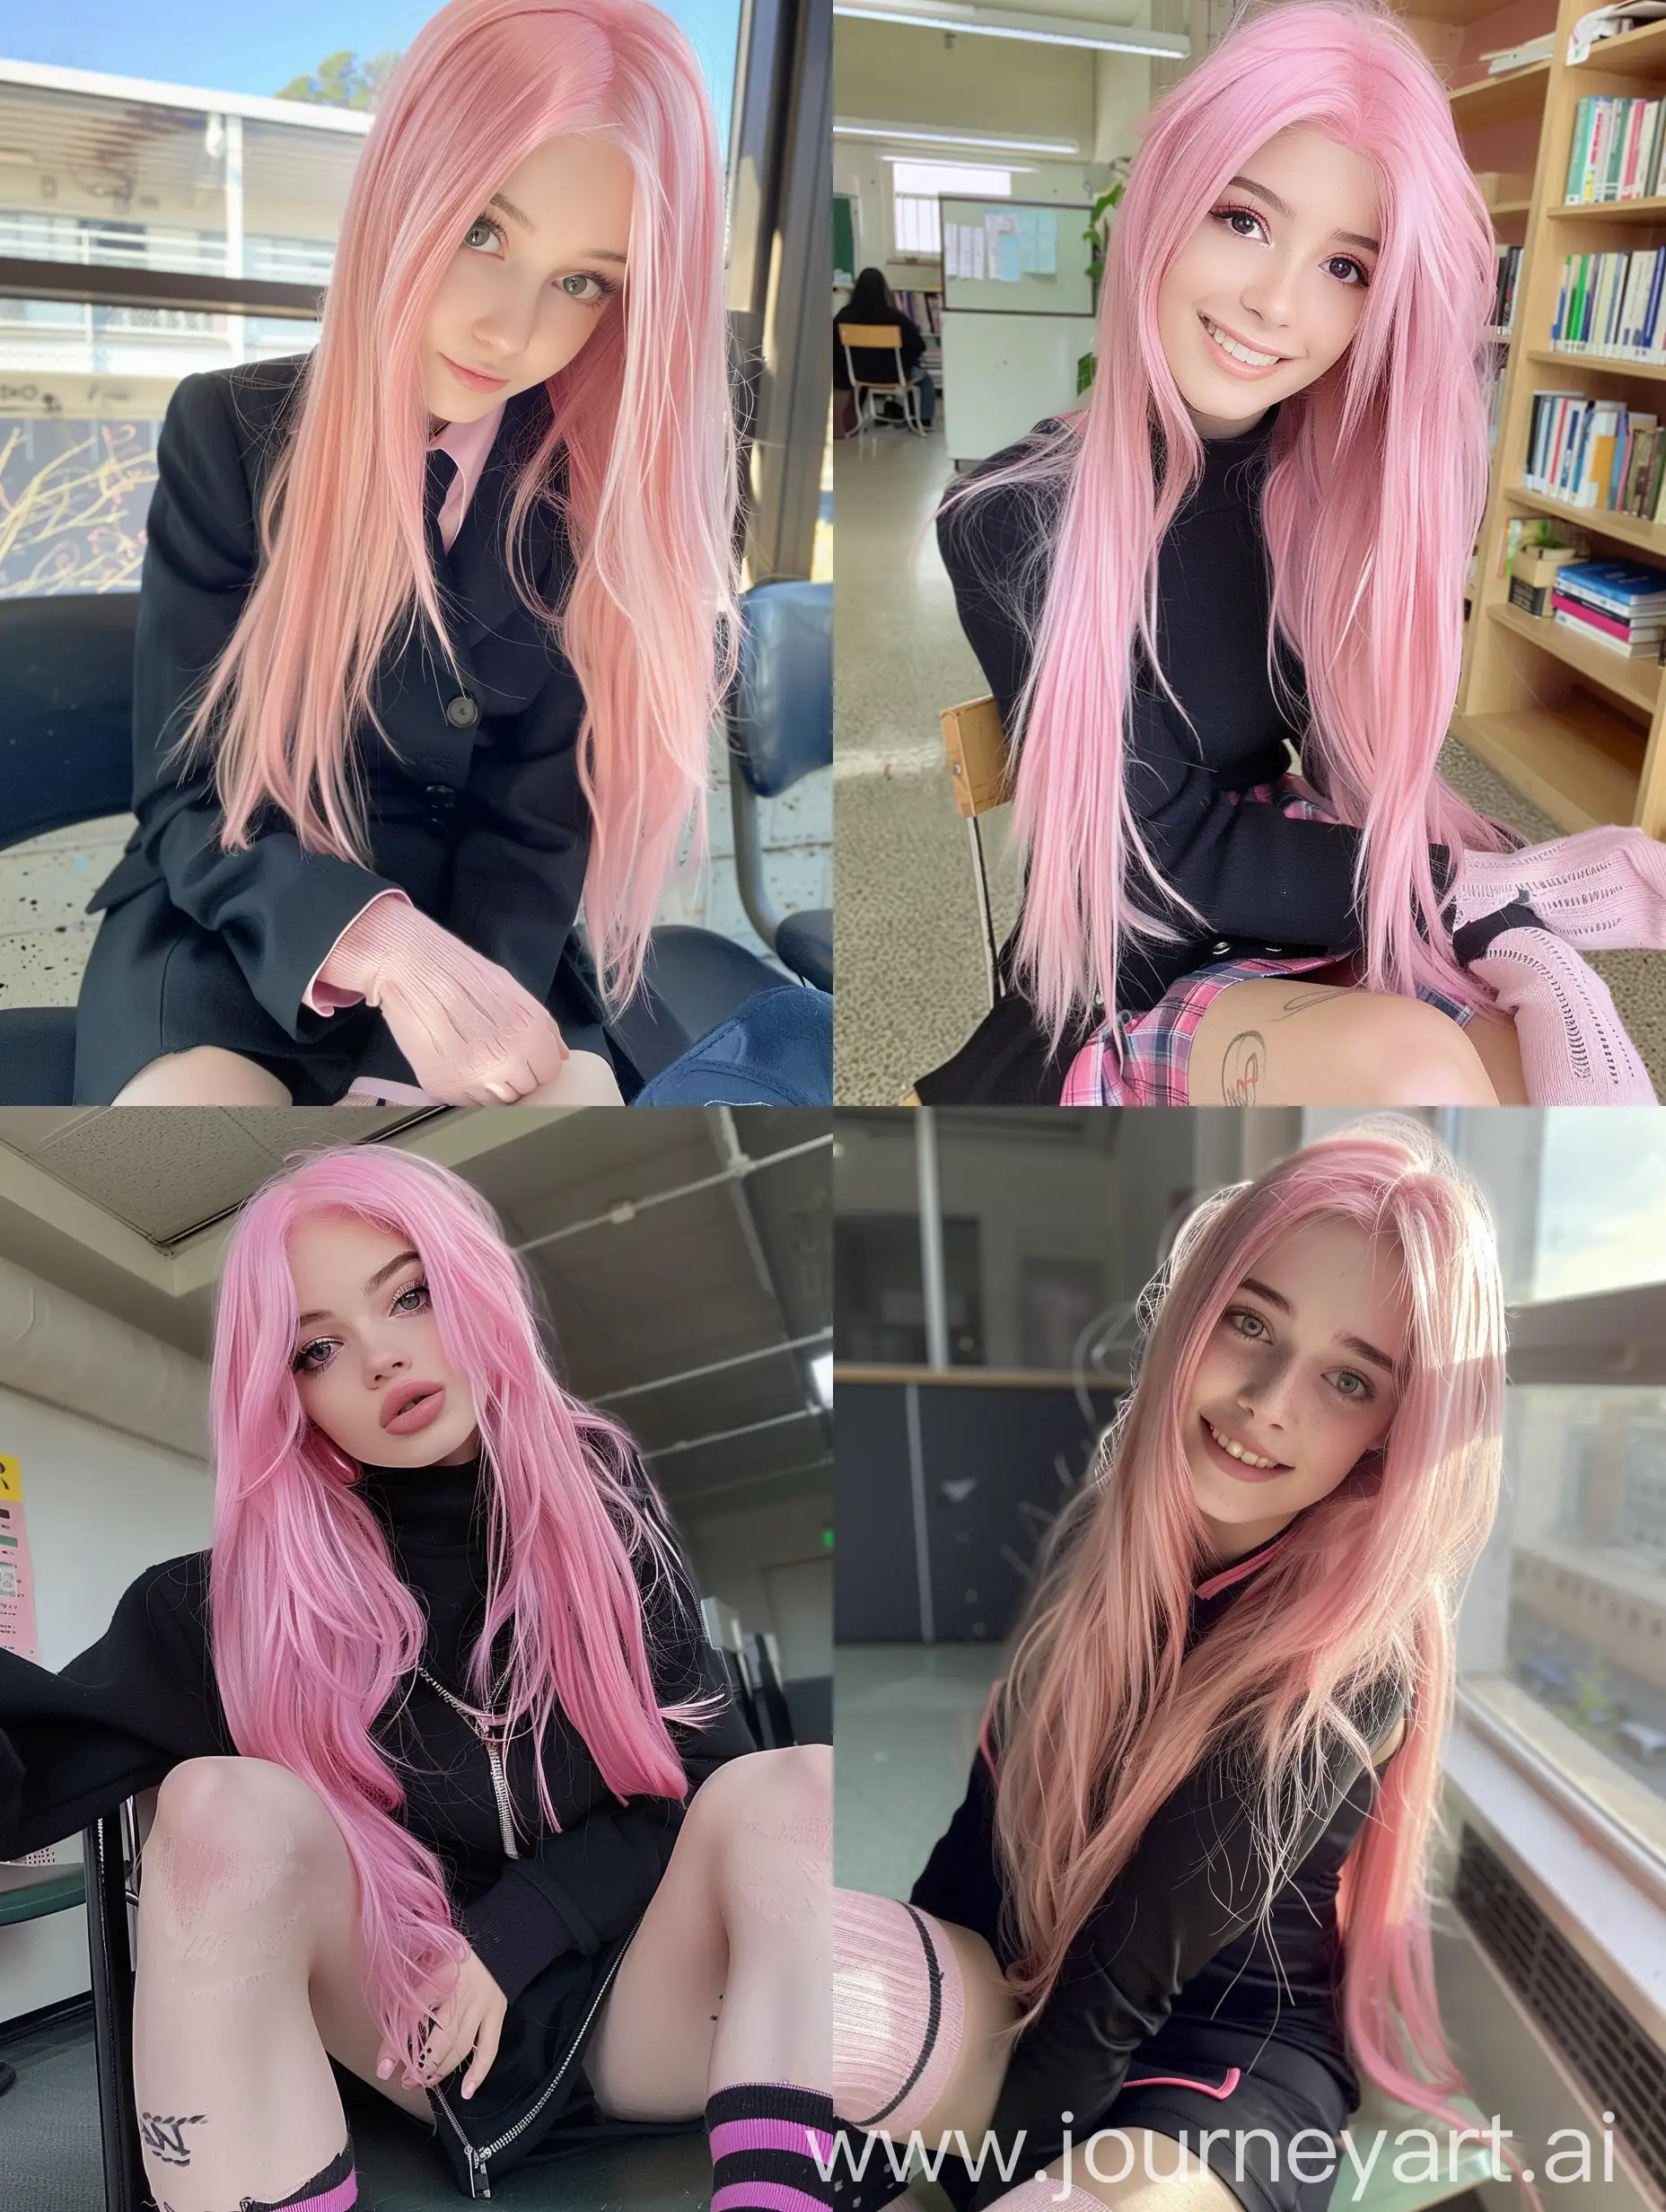 1  girl,    long pink  hair ,   22  years  old,    influencer,    beauty   ,     in  the  school    ,school black and pink  uniform  ,  makeup,   smiling, chão view,      sitting  on  chair  ,    socks  and  boots,    no  effect,     selfie   , iphone  selfie,      no  filters ,   iphone  photo    natural